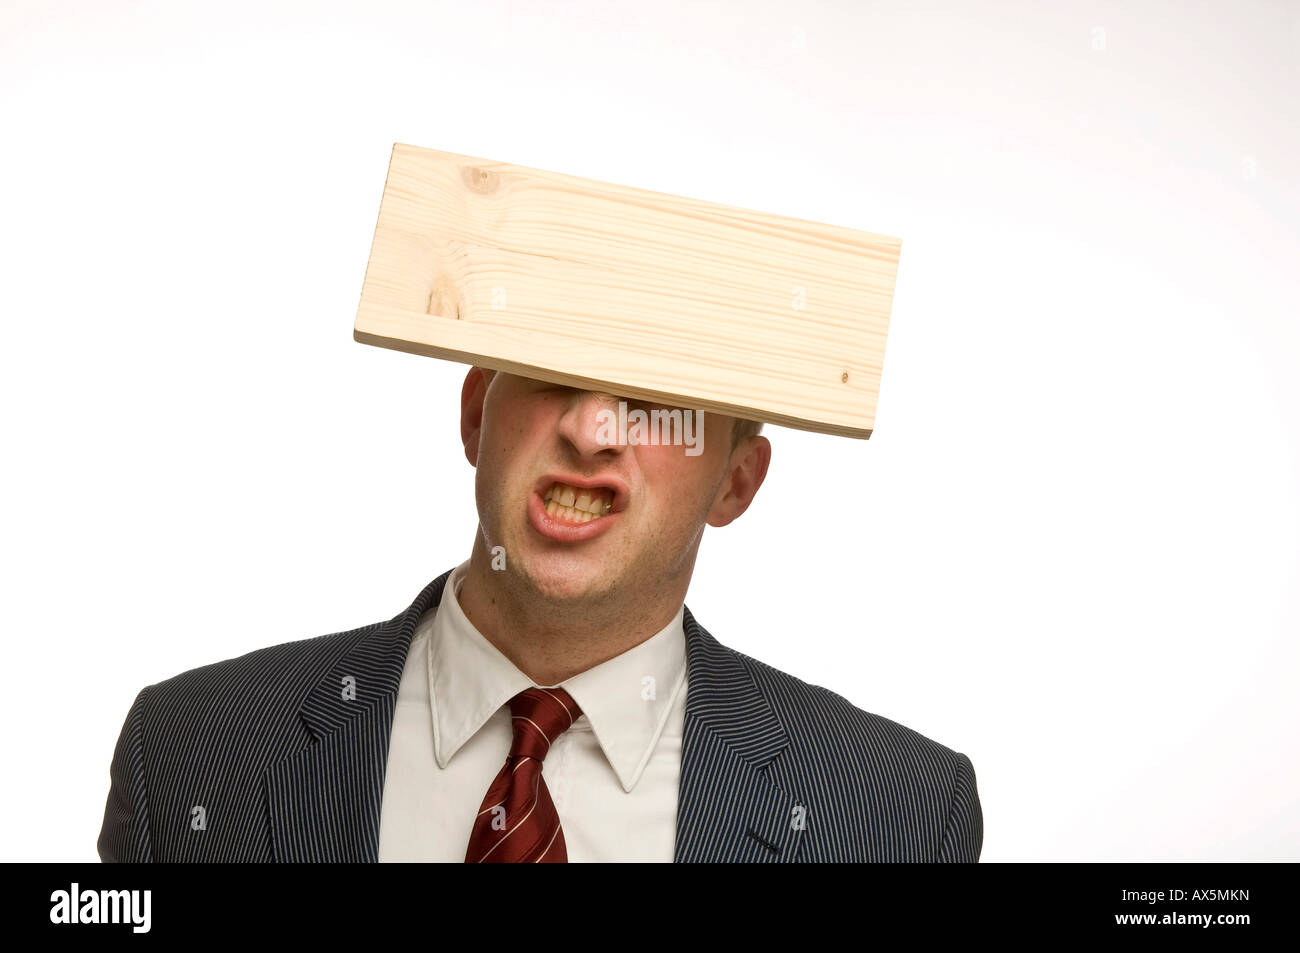 Young man balancing a wooden board on his forehead Stock Photo